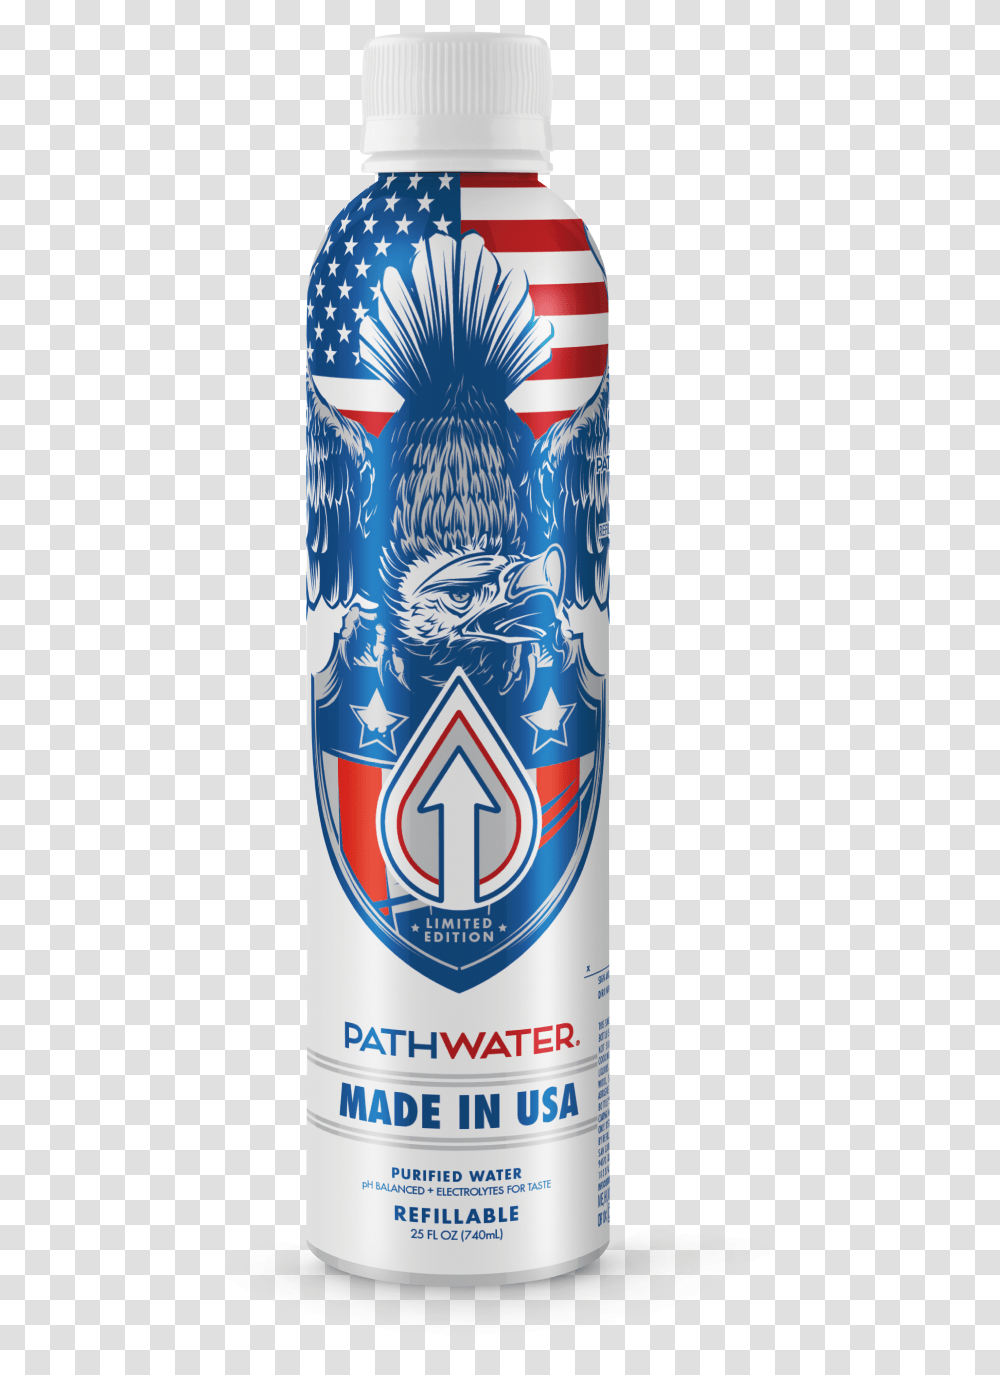 Made In Usa Water Bottle Bottled Pathwater Path Water American Bottle, Beverage, Drink, Alcohol, Beer Transparent Png